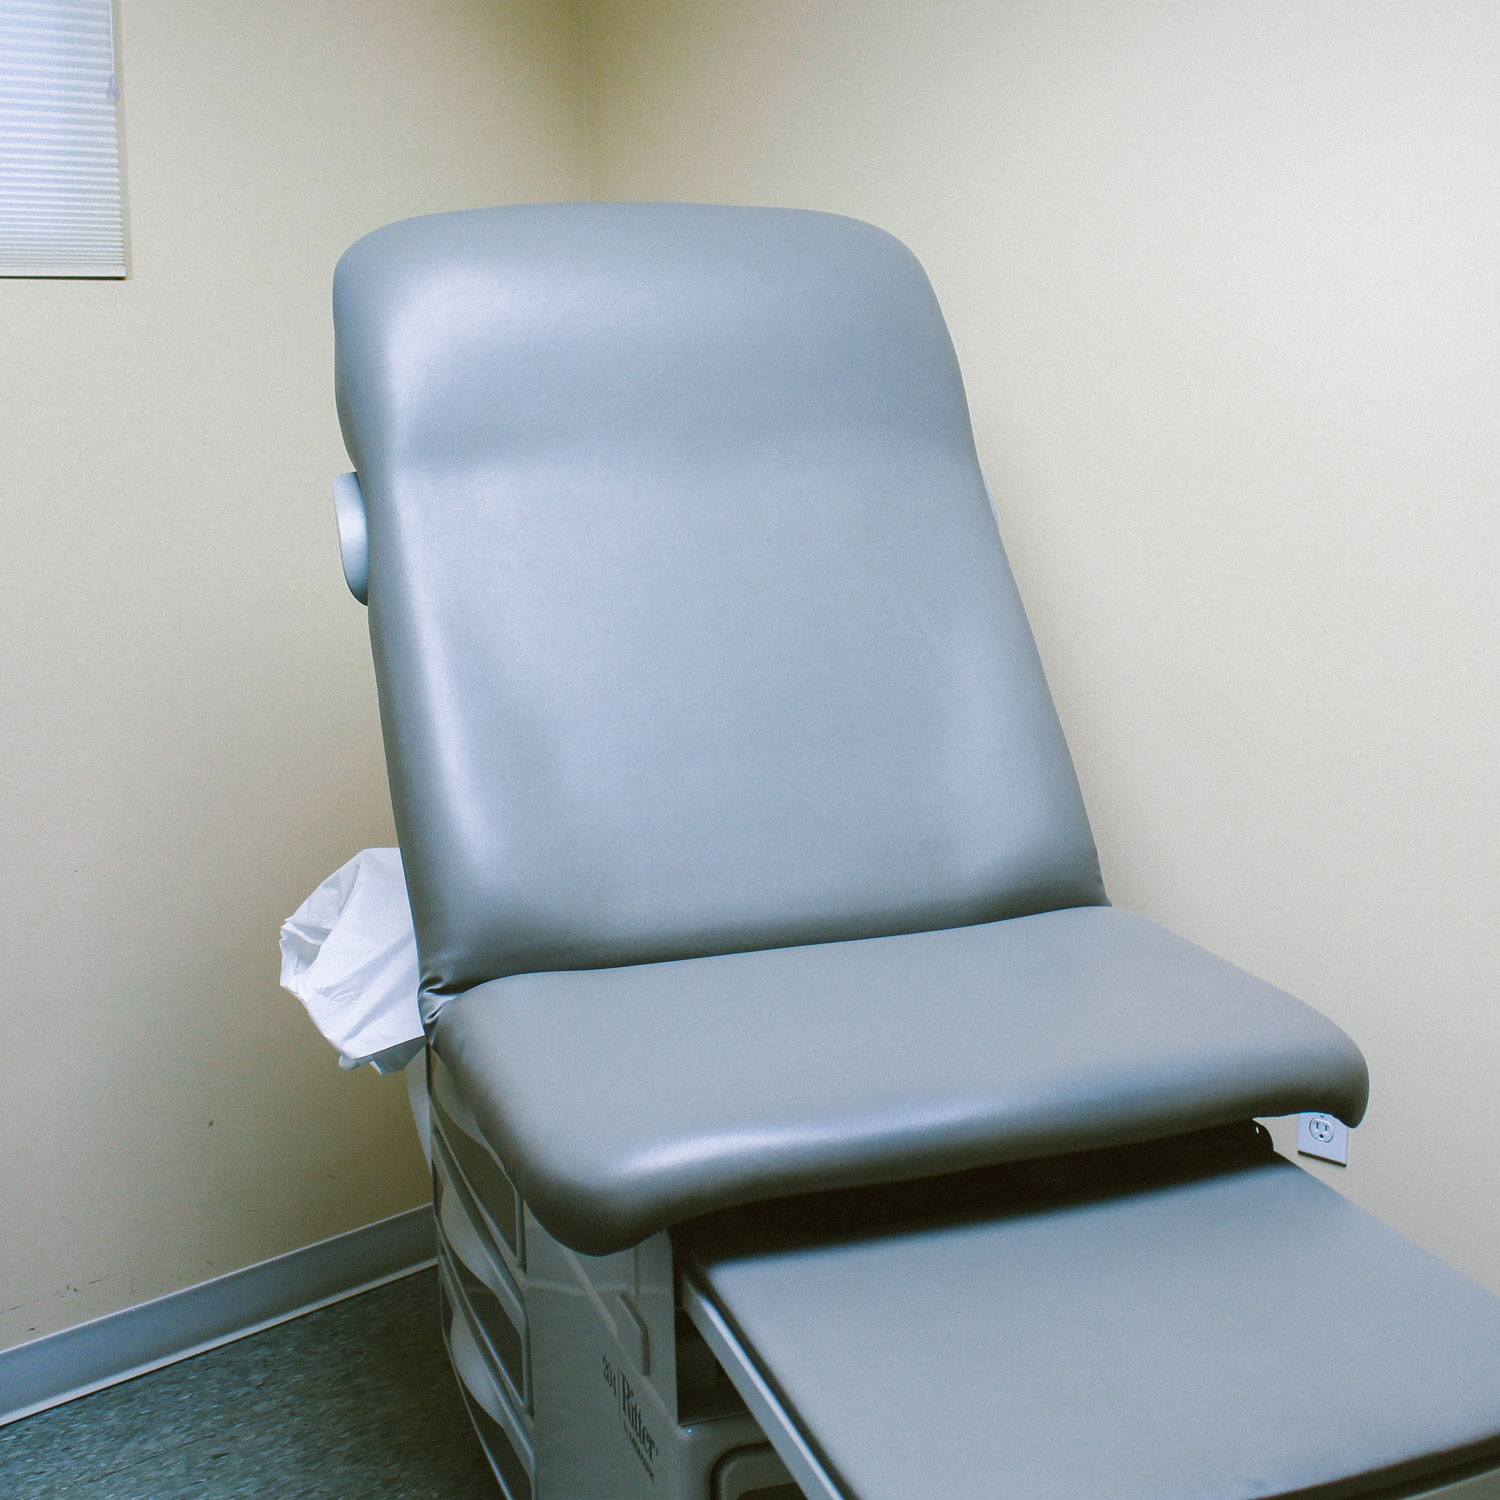 A photo of a patient's chair in the doctor's room.